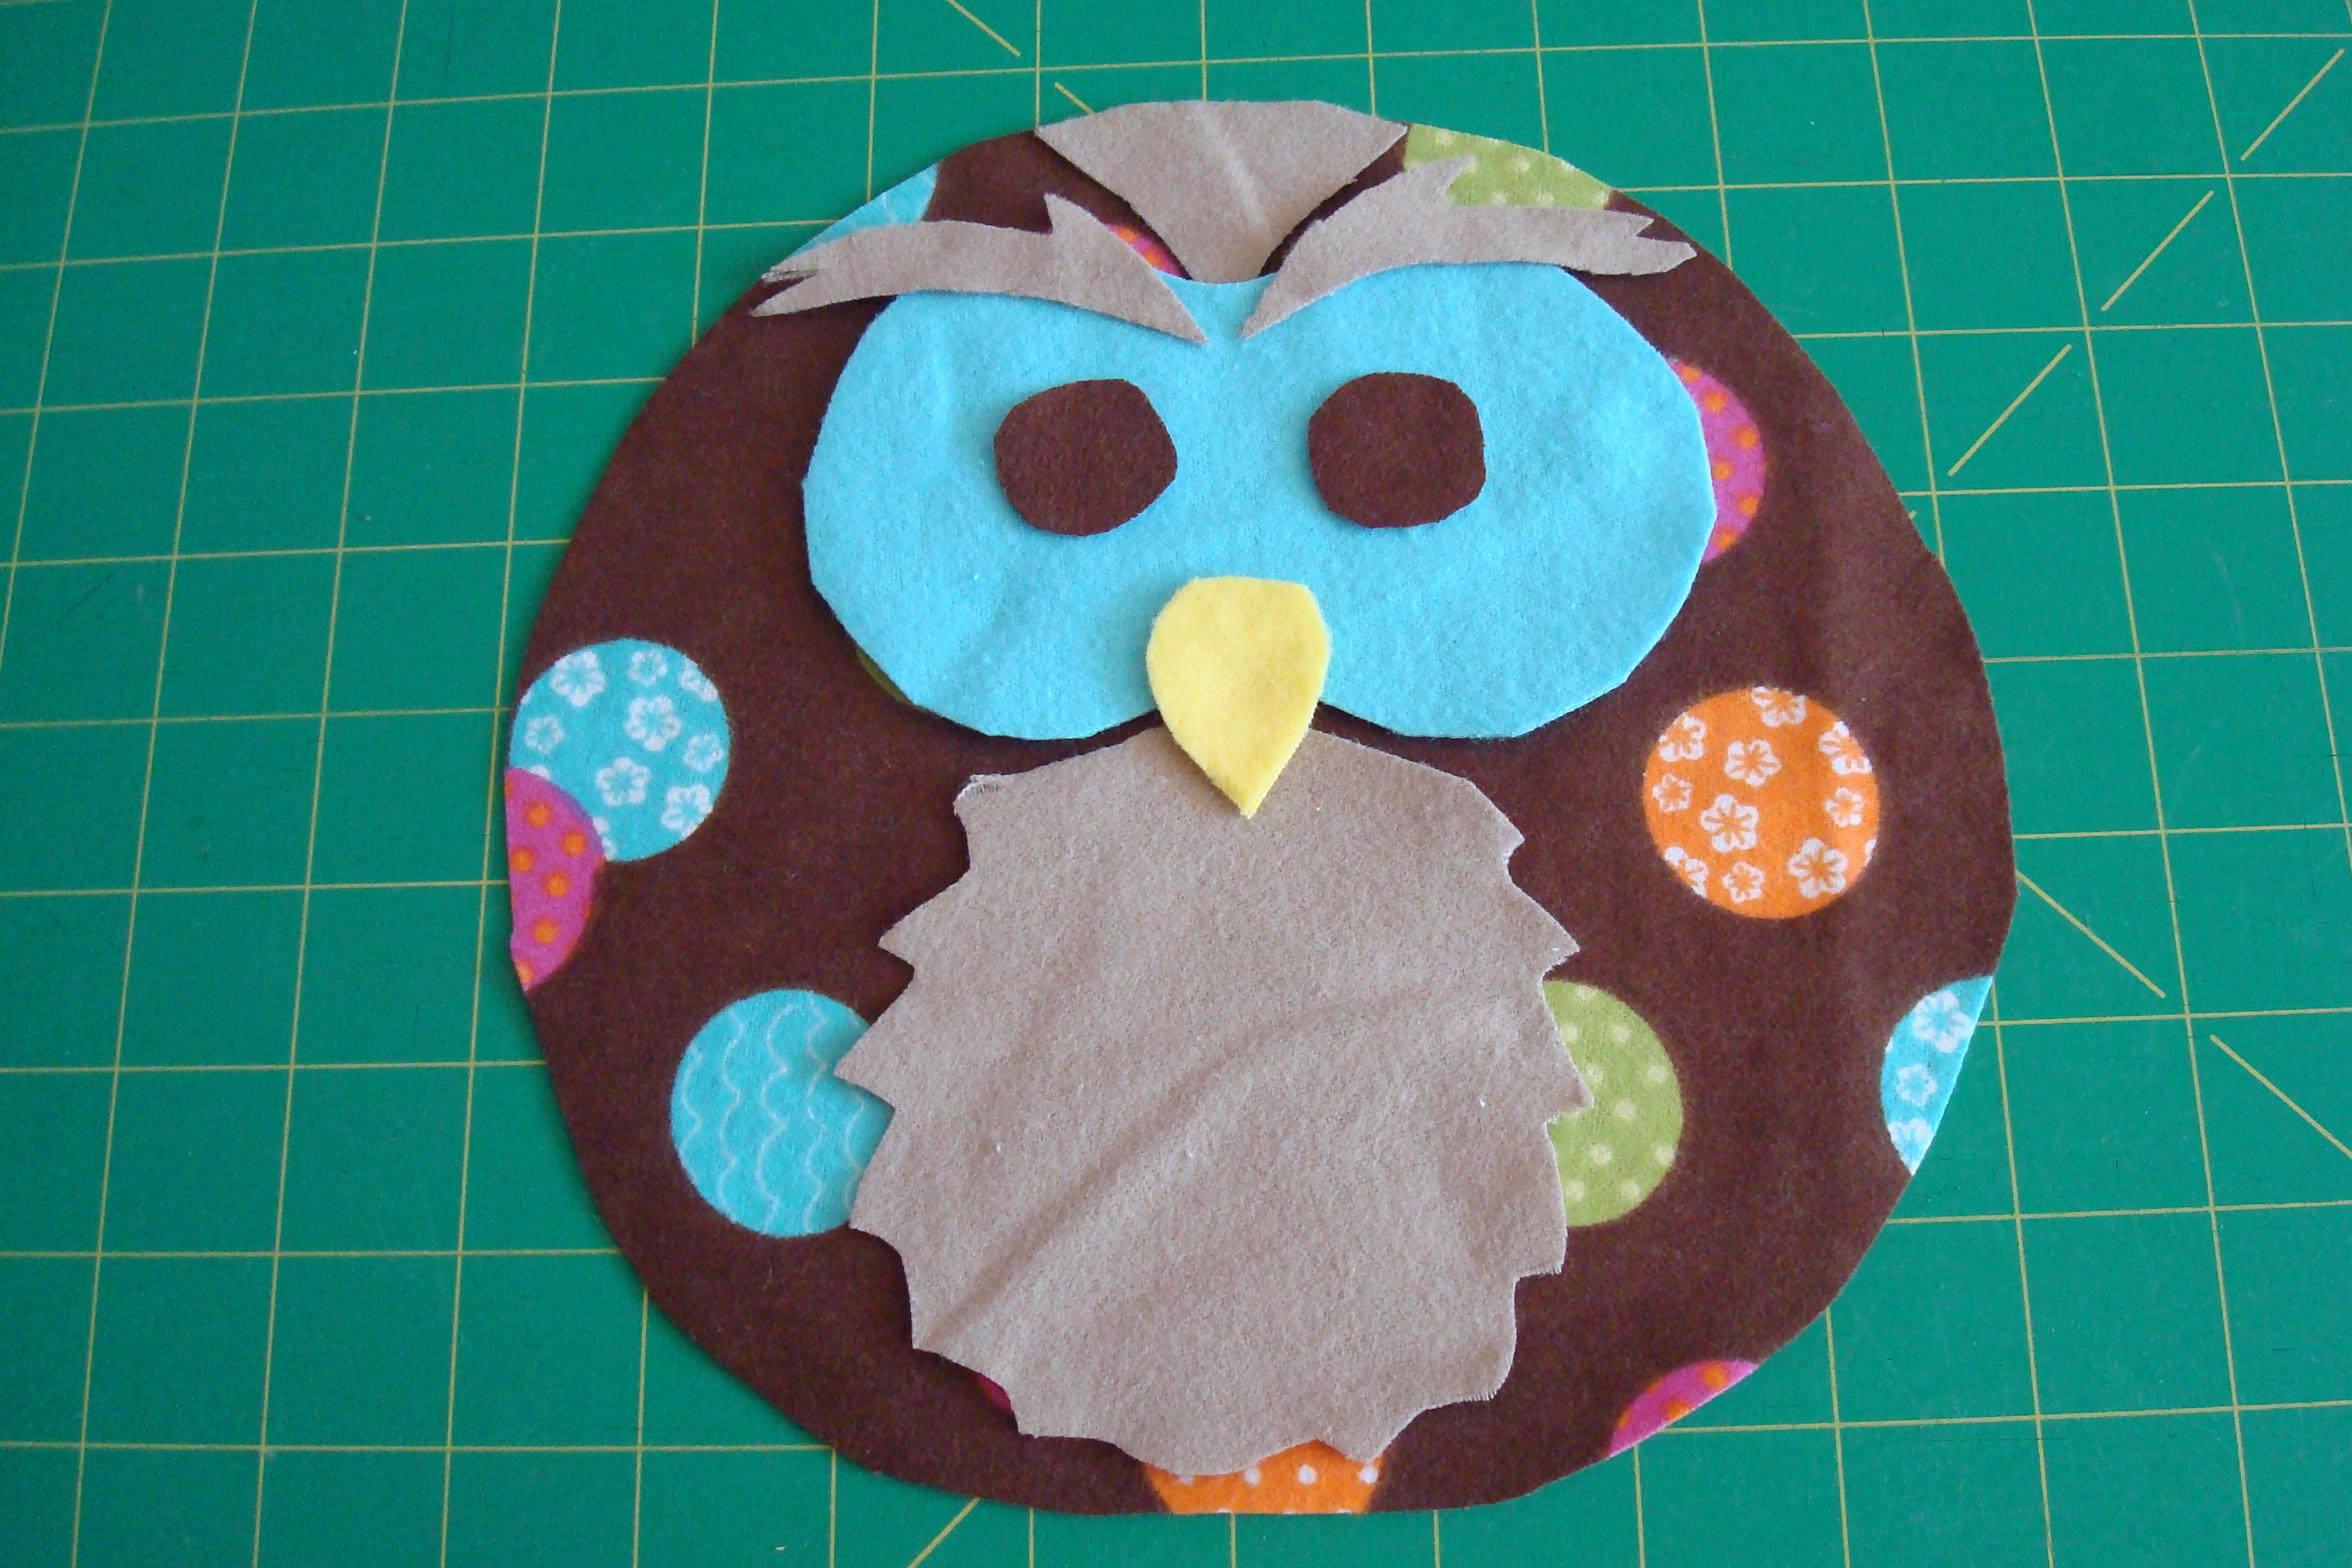 Template pieces to sew an owl